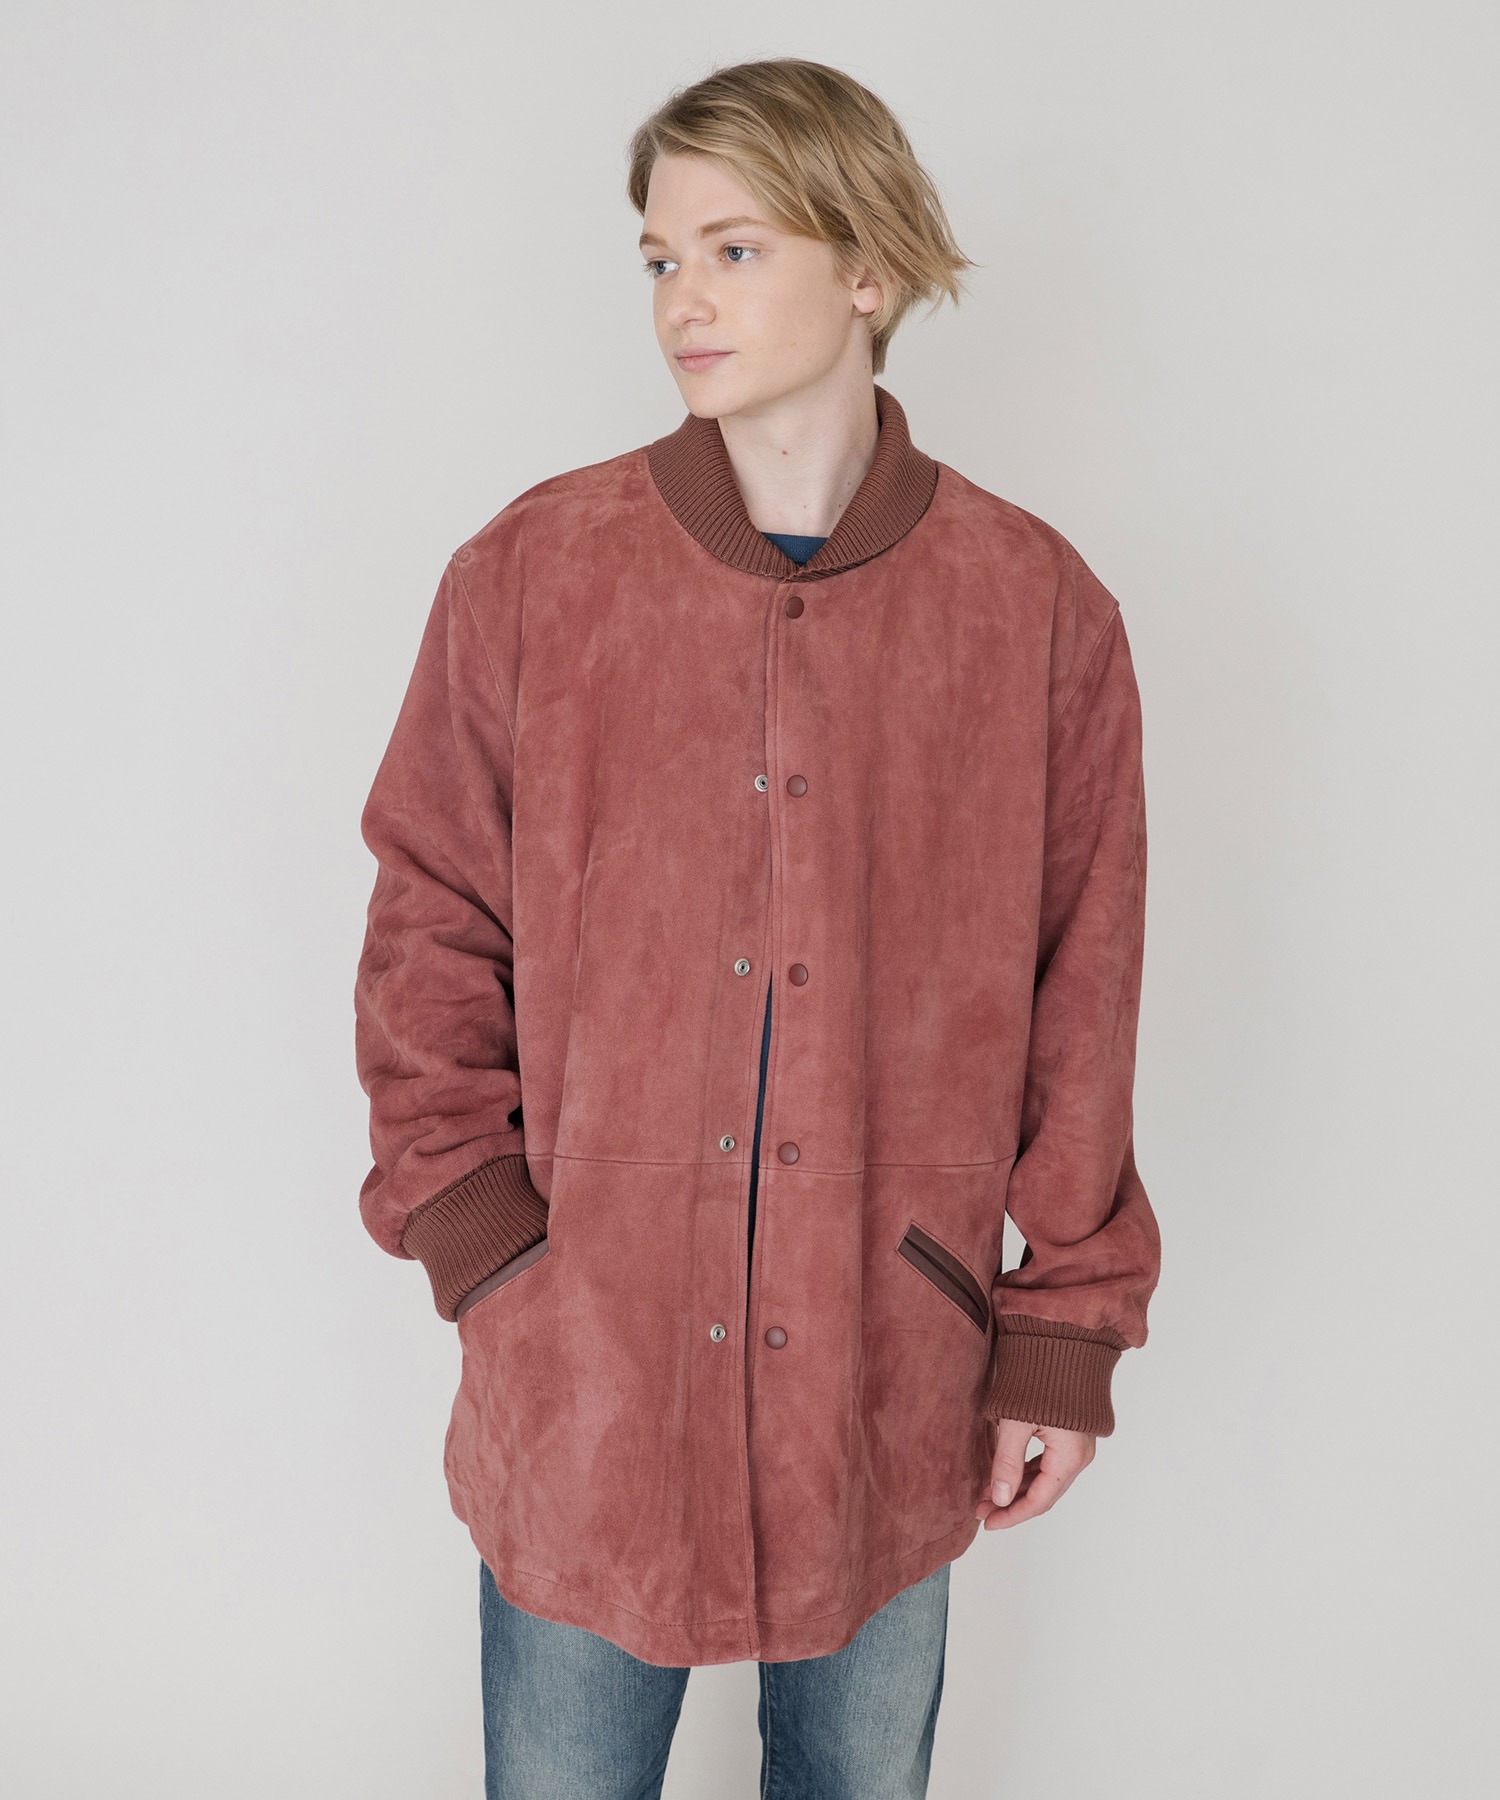 Levi'sLEVI'S R 高額売筋 プレゼント MADECRAFTED BROWN COPPER スエードスポーツジャケット